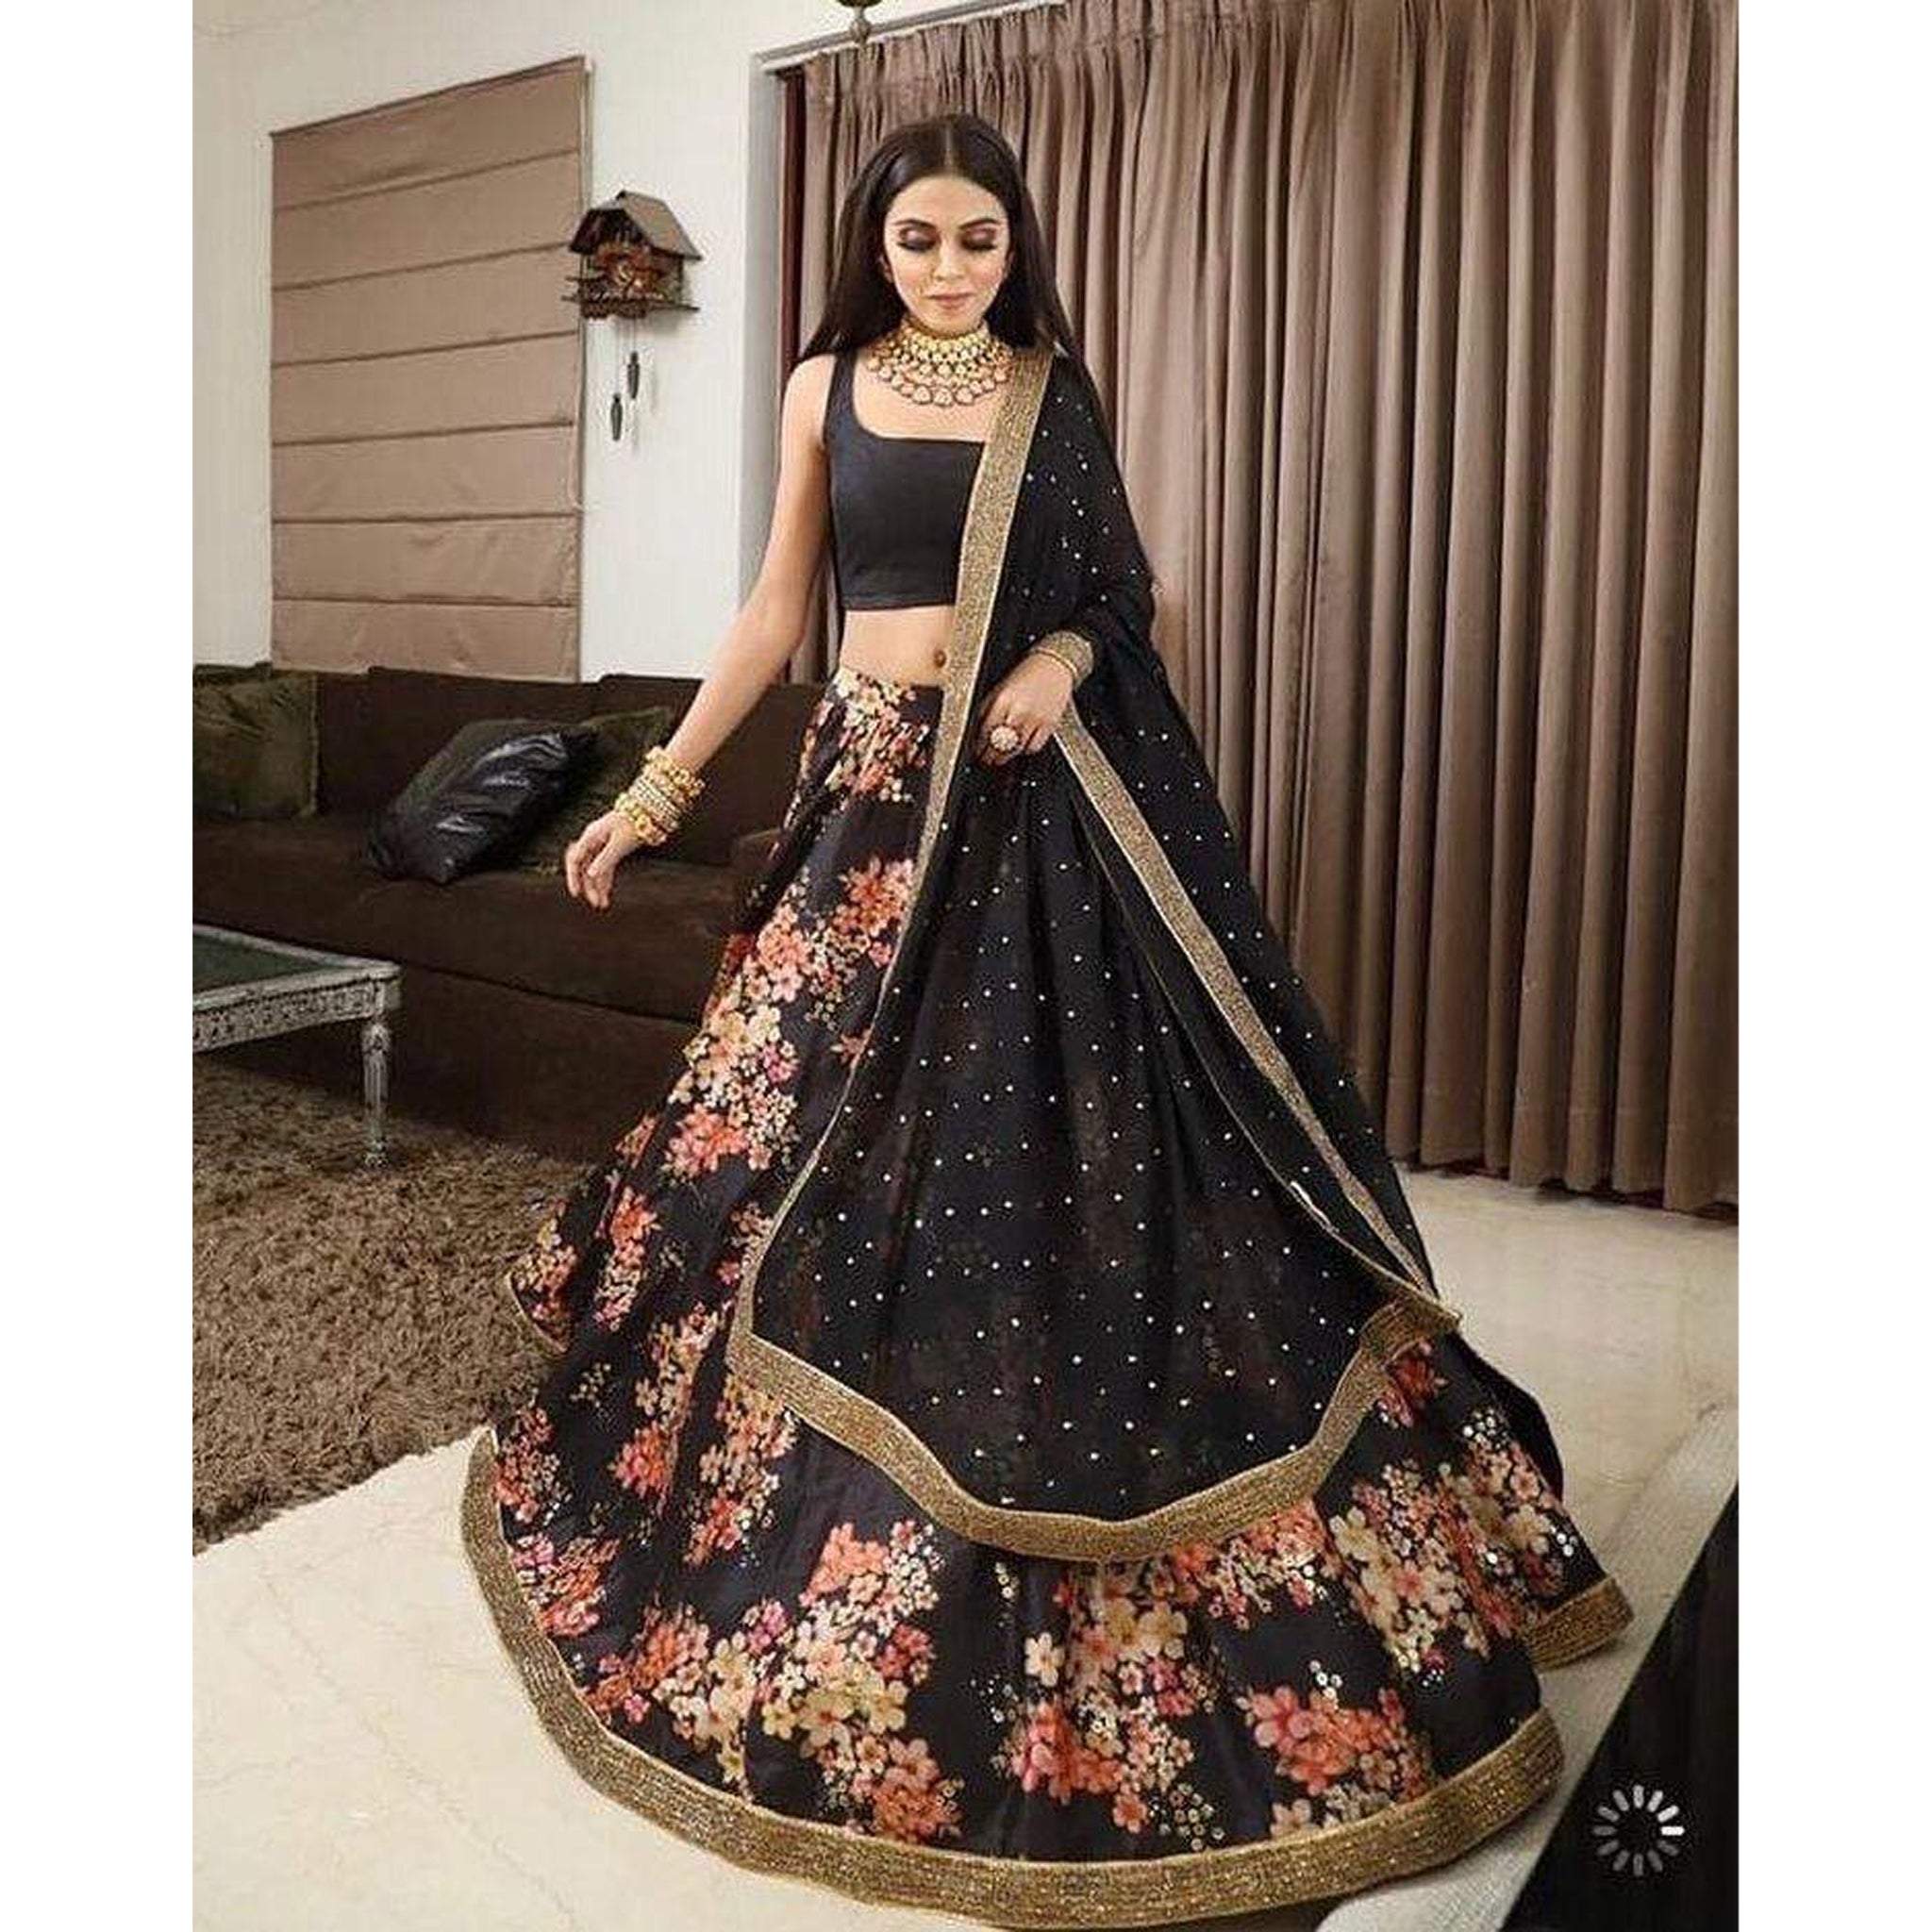 Stunning black nad gray color combination lehenga and black blouse with  jari over coat. Cape with